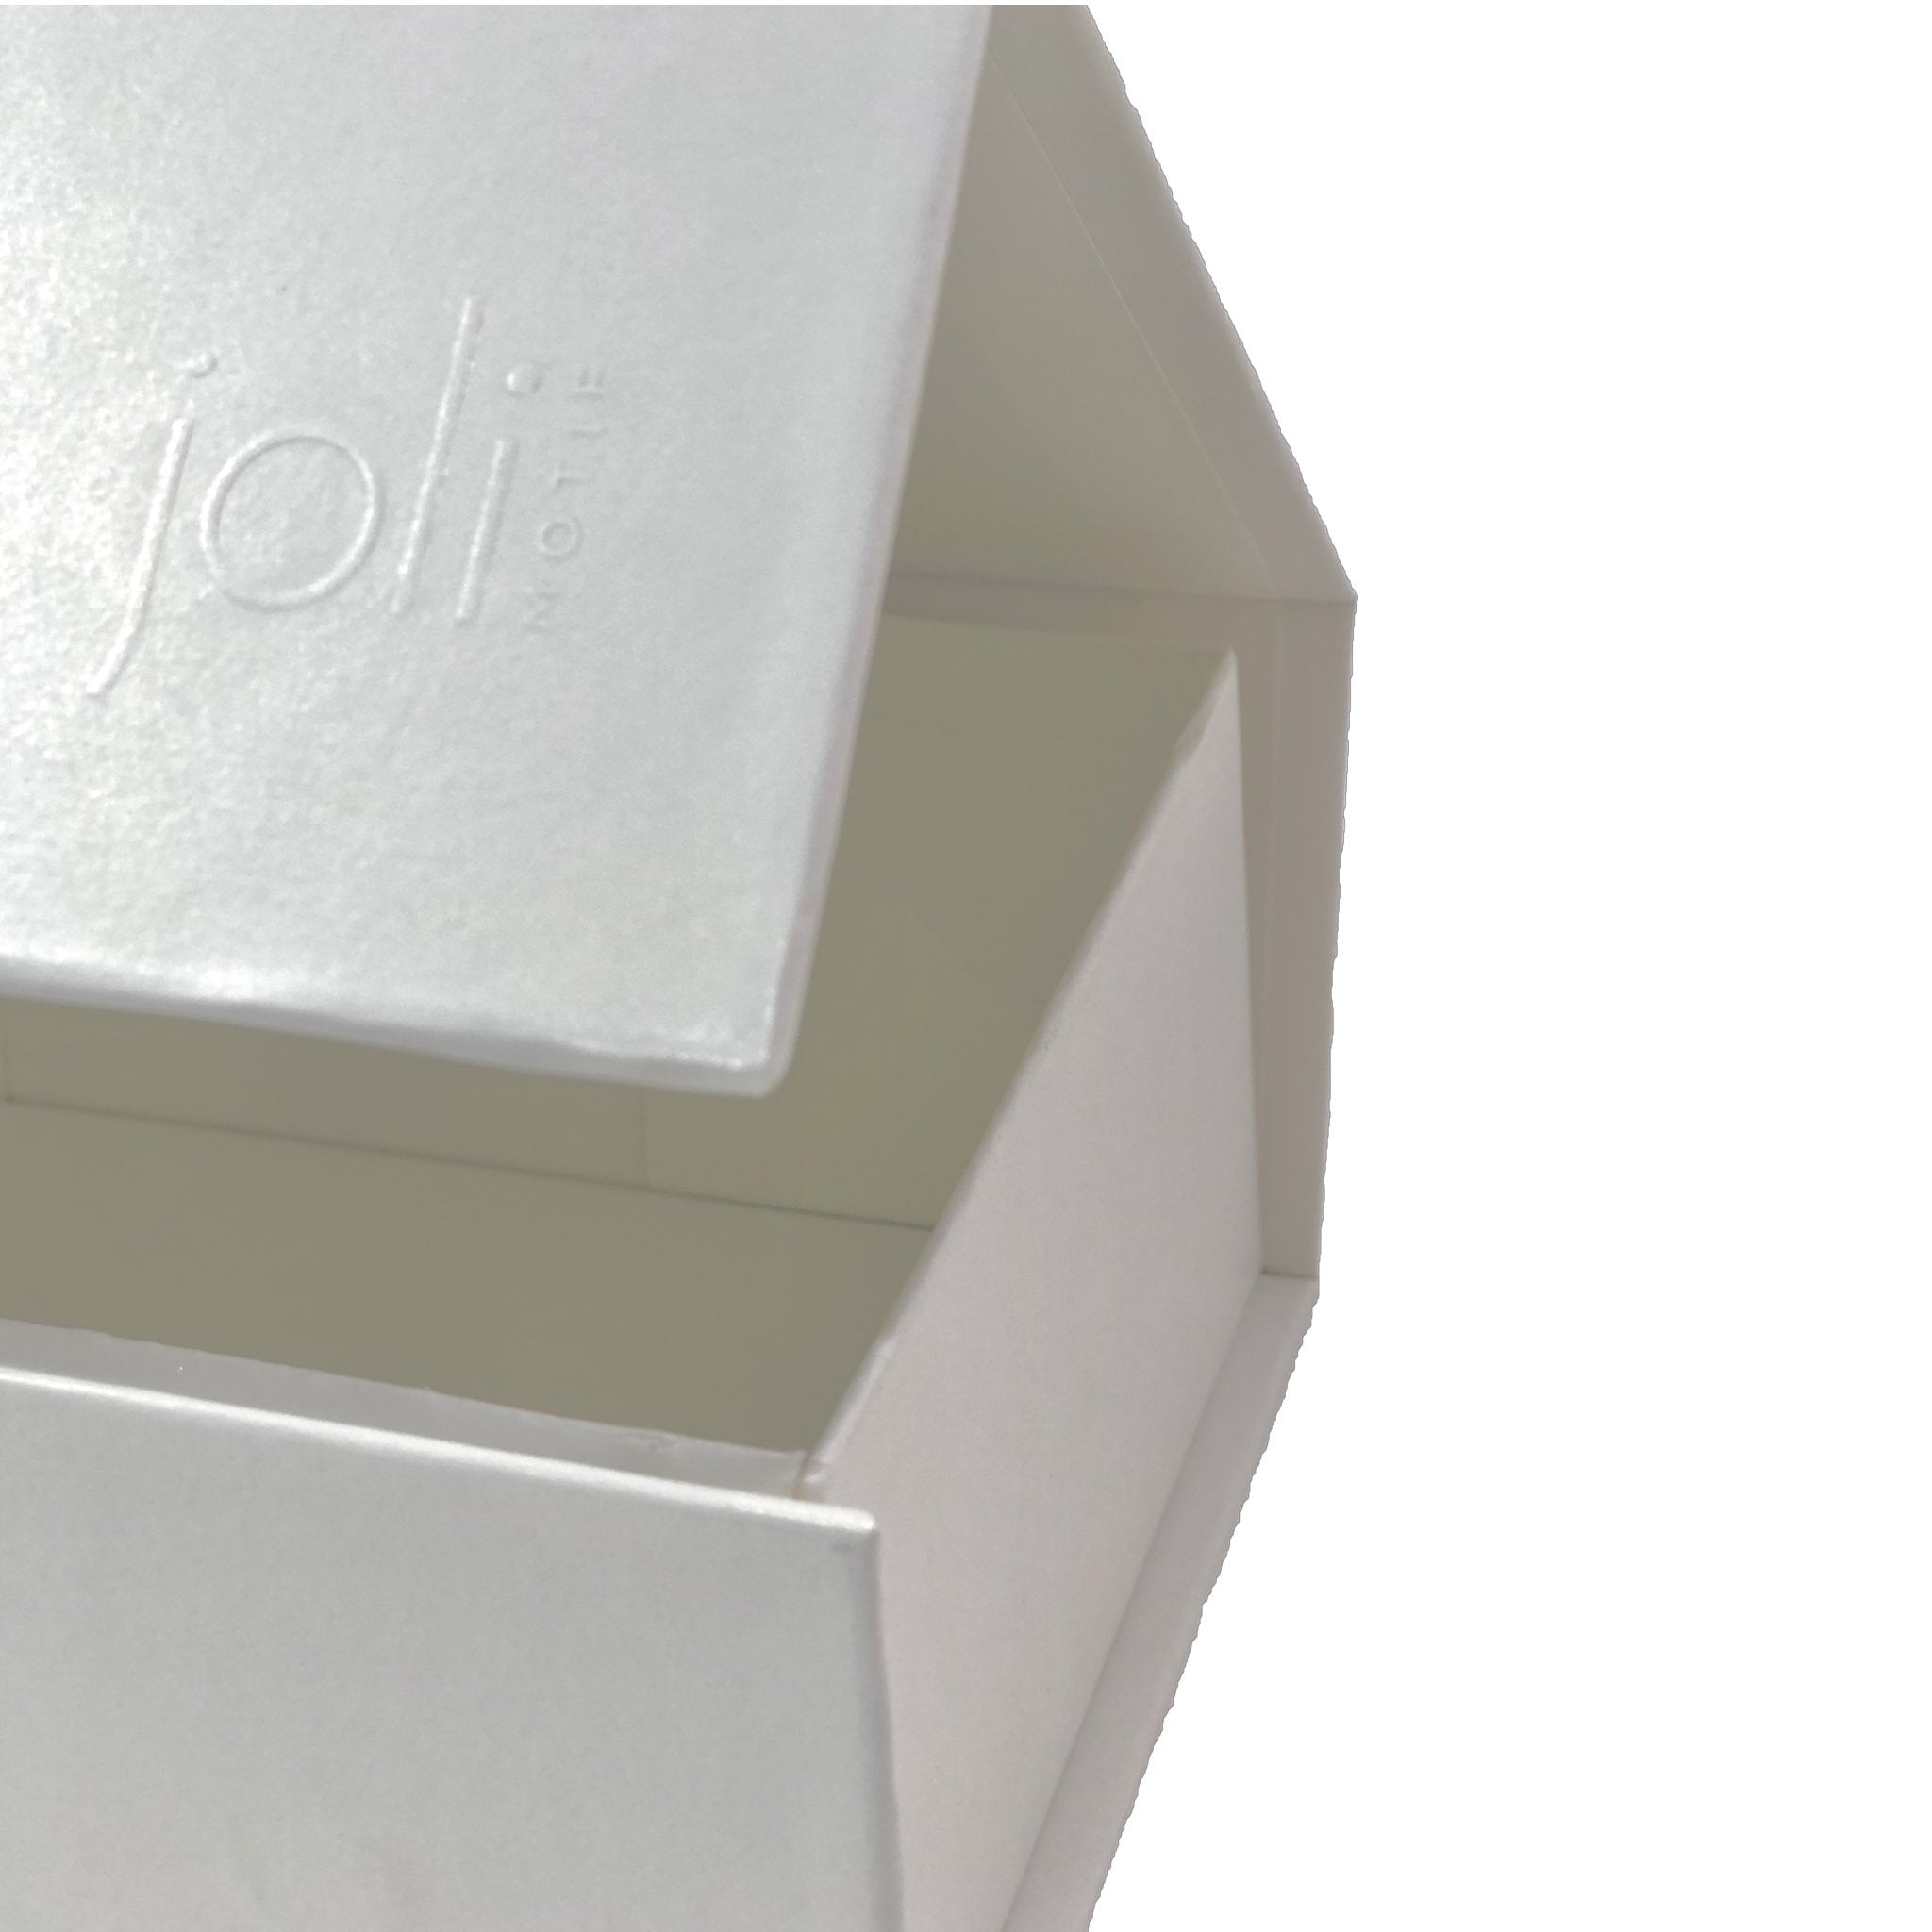 White Magnetic Gift Box Lid Close Up